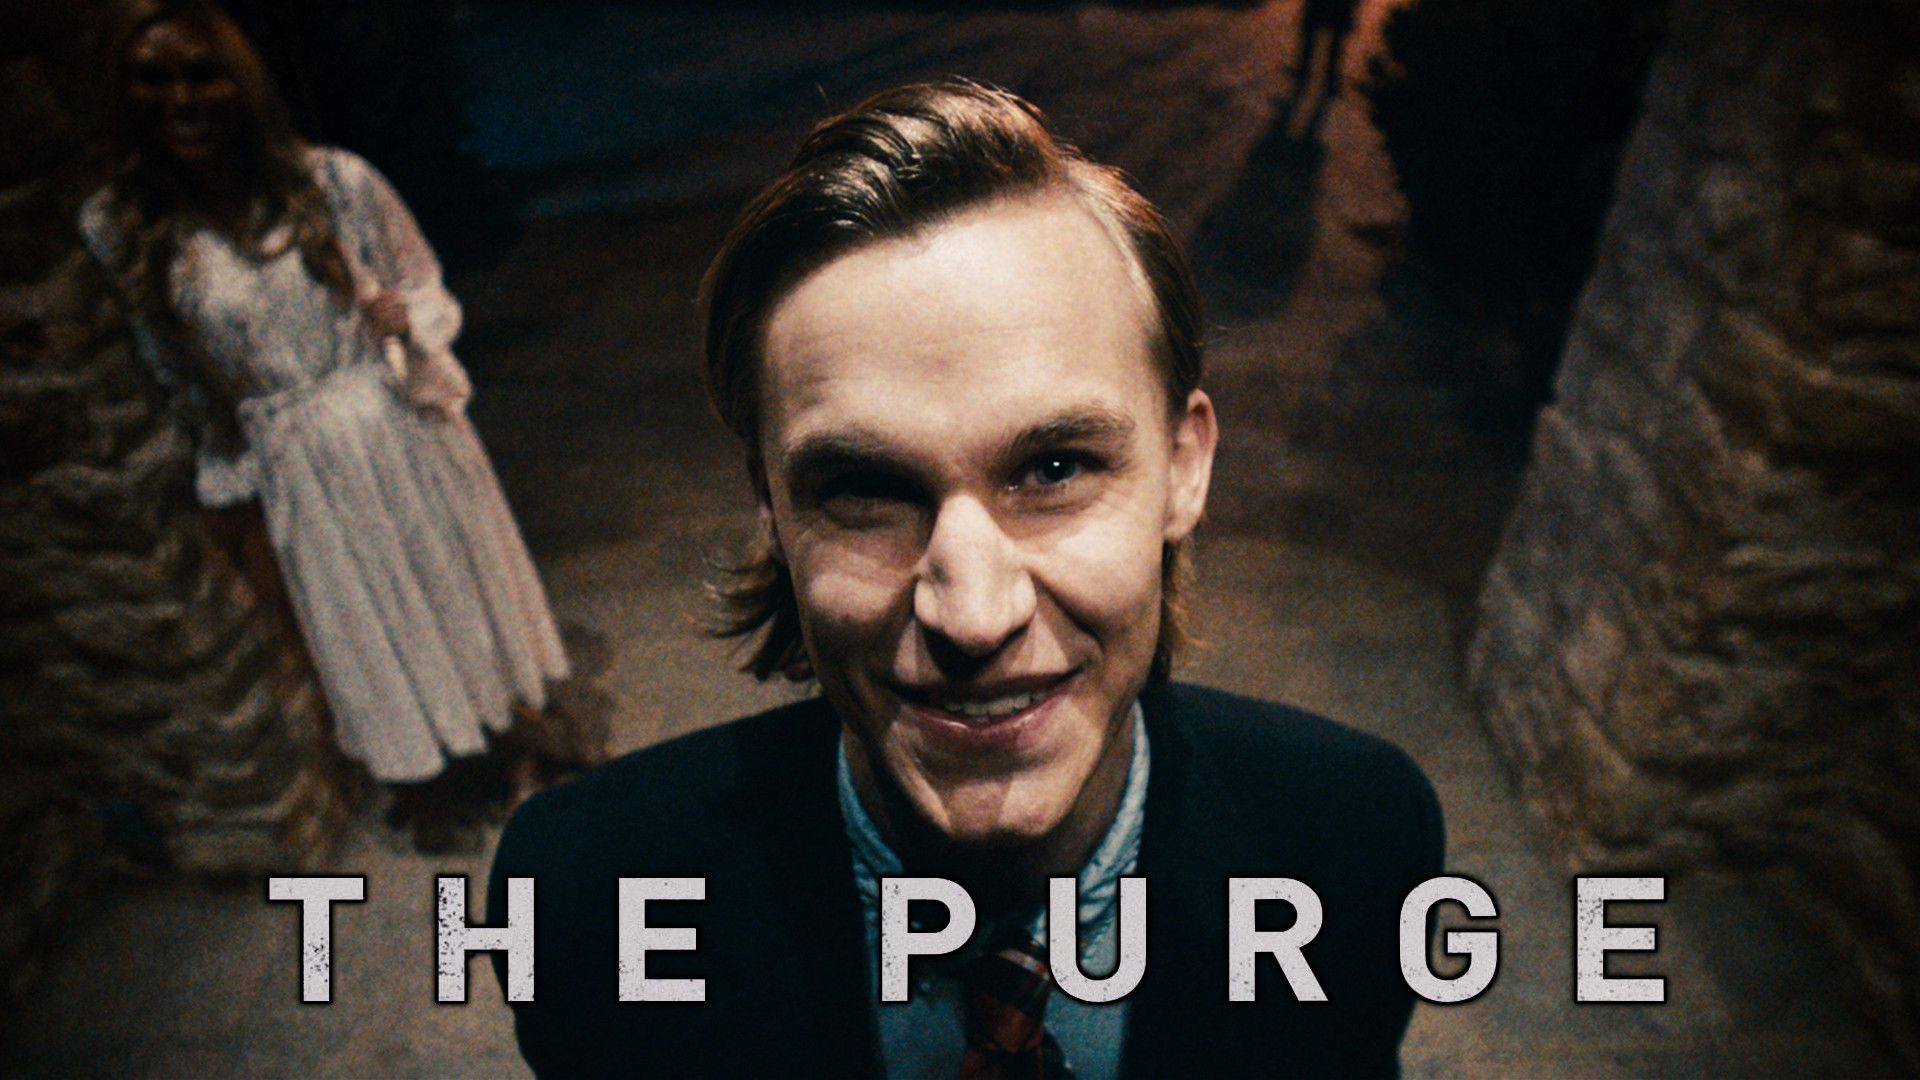 1920x1080 The Purge Wallpaper by ditzydaffy The Purge Wallpaper by ditzydaffy